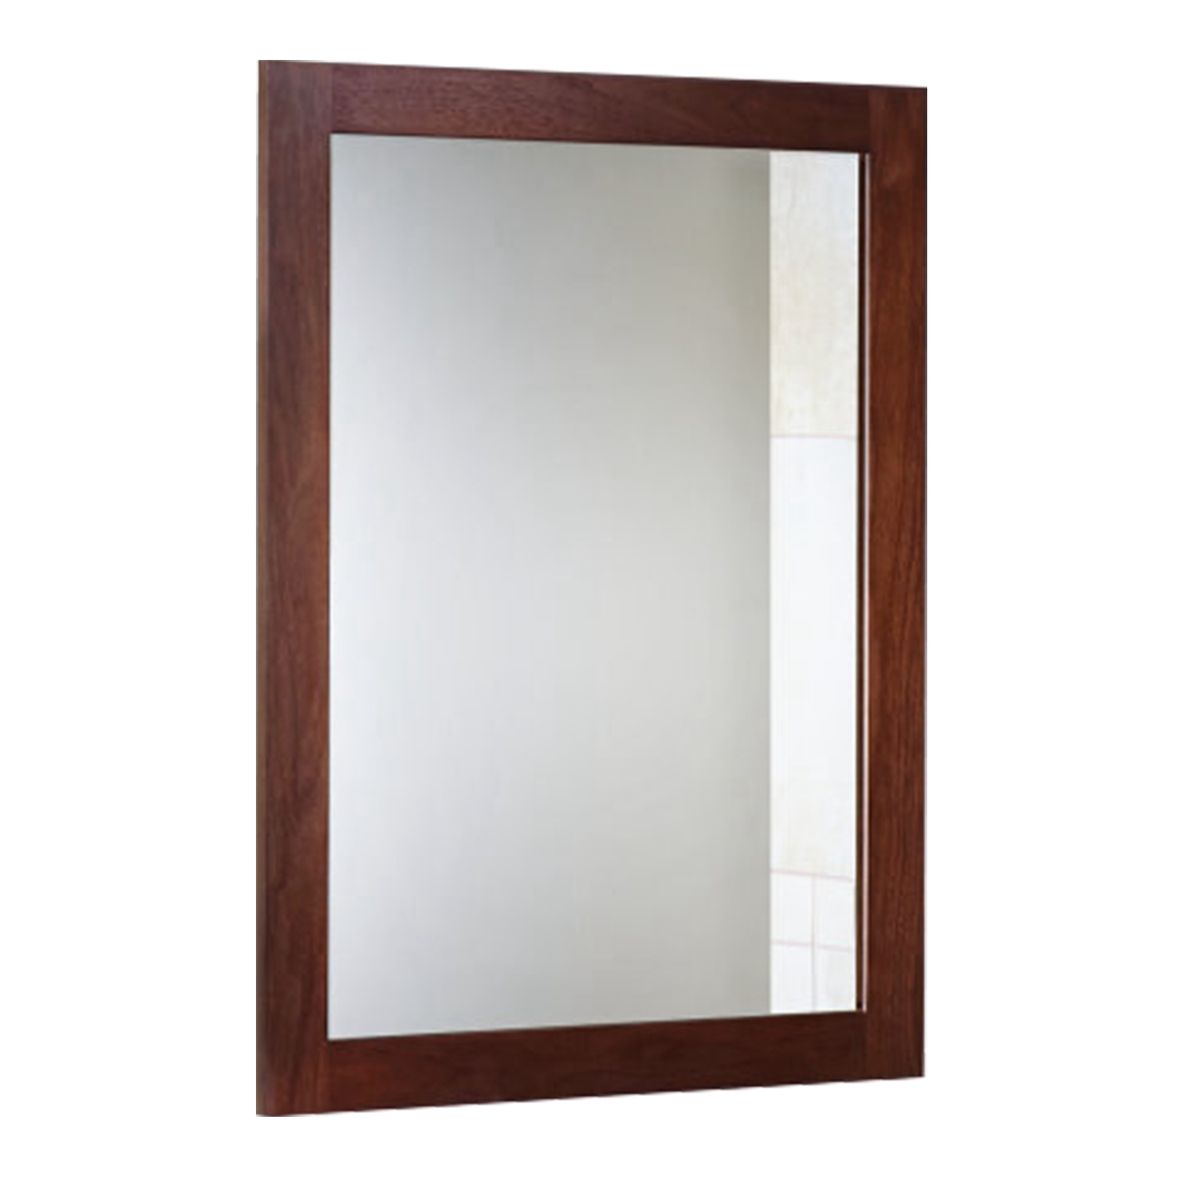 Photos - Wall Mirror New Home NewHome NewHome Wall Mounted Mirror - NewHome Wall Mounted Mirror R HGMIRR 